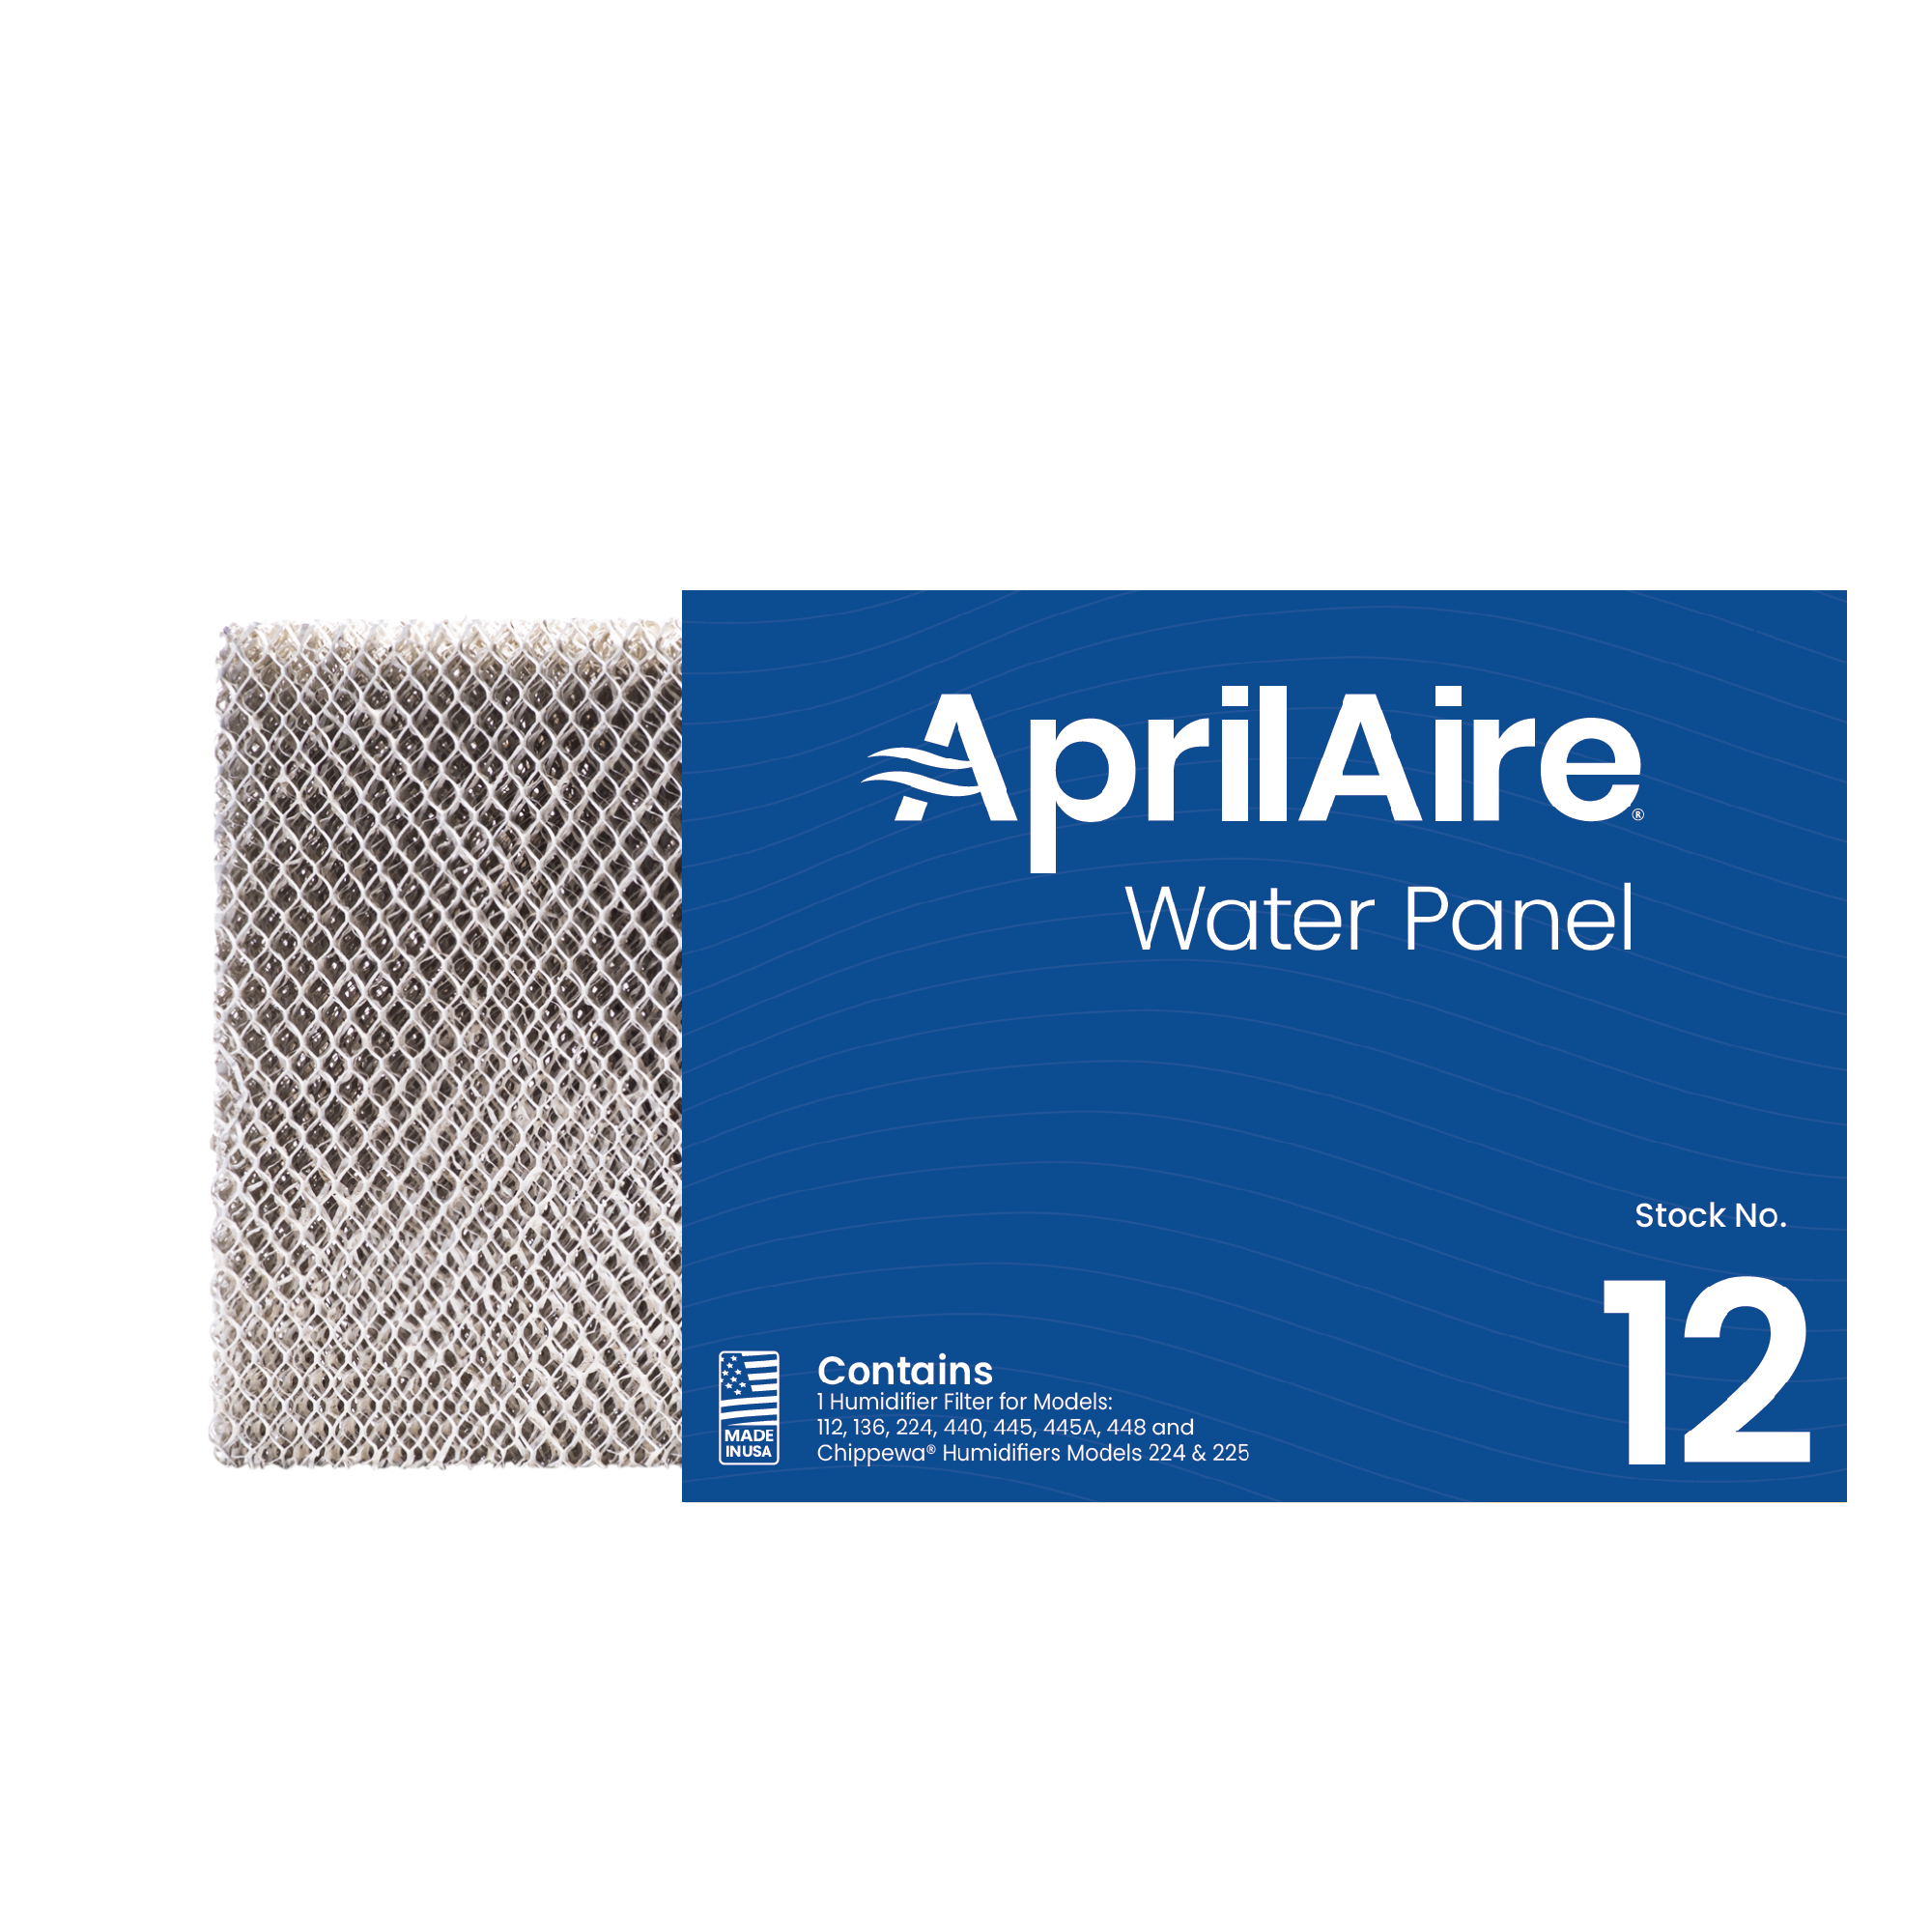 12 Box Water Panel Humidifier Filter Fits Whole-House Humidifier 112, 136, 224, 440, 445, 445A, 448